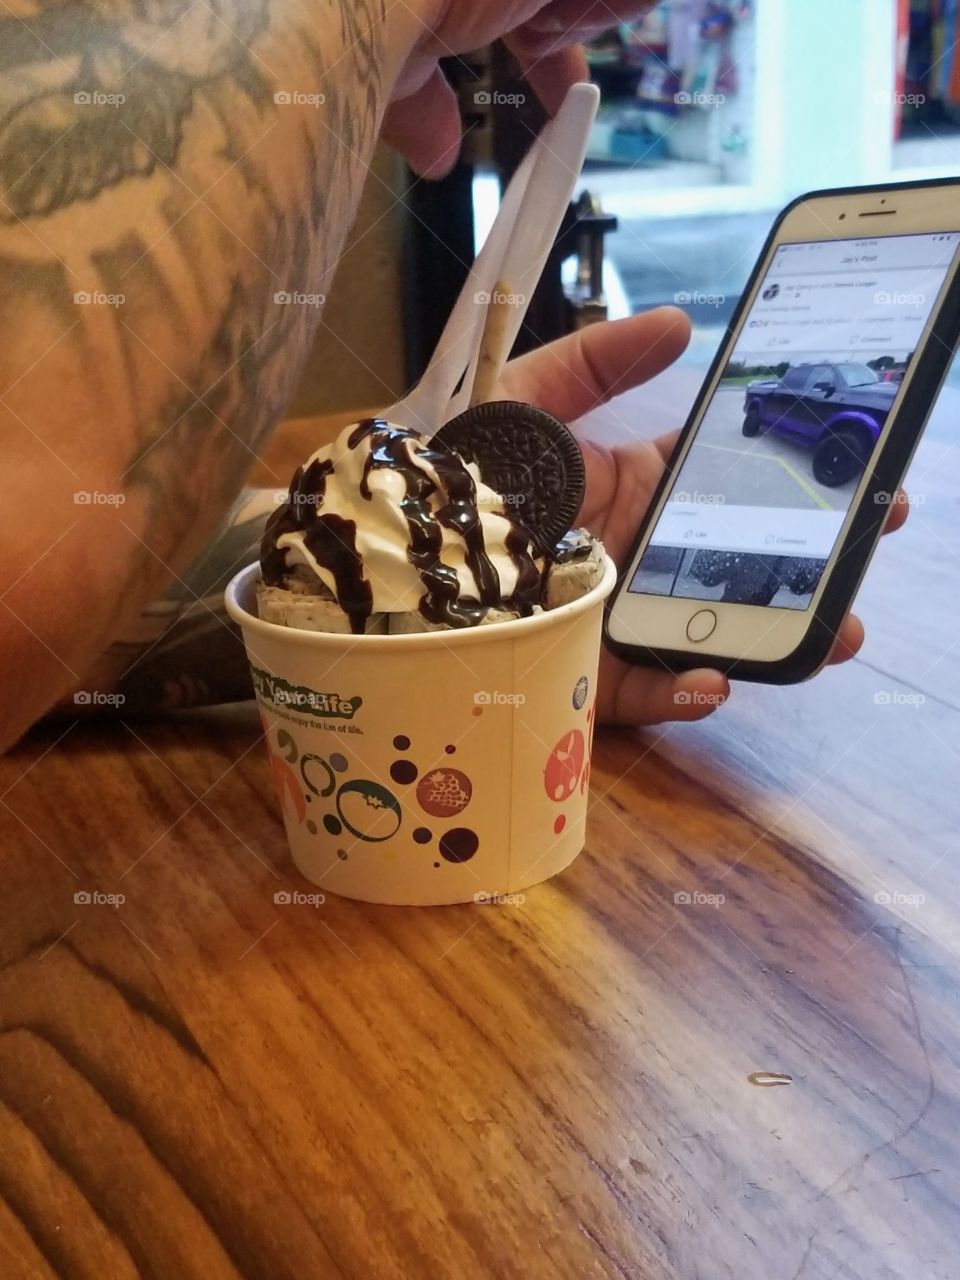 Eating some ice cream while on social media